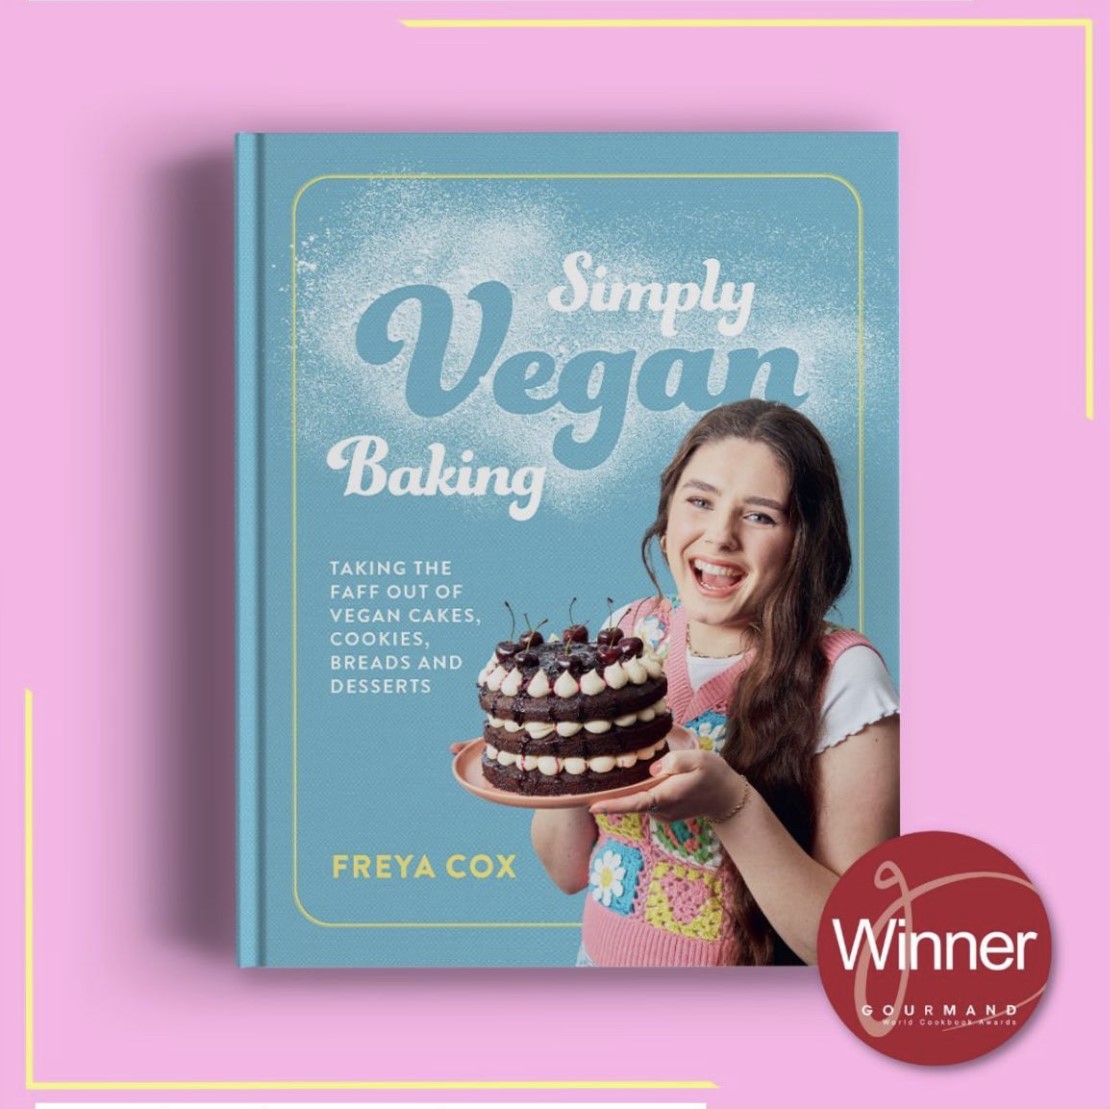 Delighted to share that @freyacox_'s debut book has won a Gourmand Award! #ProudAgents #vegan #GBBO